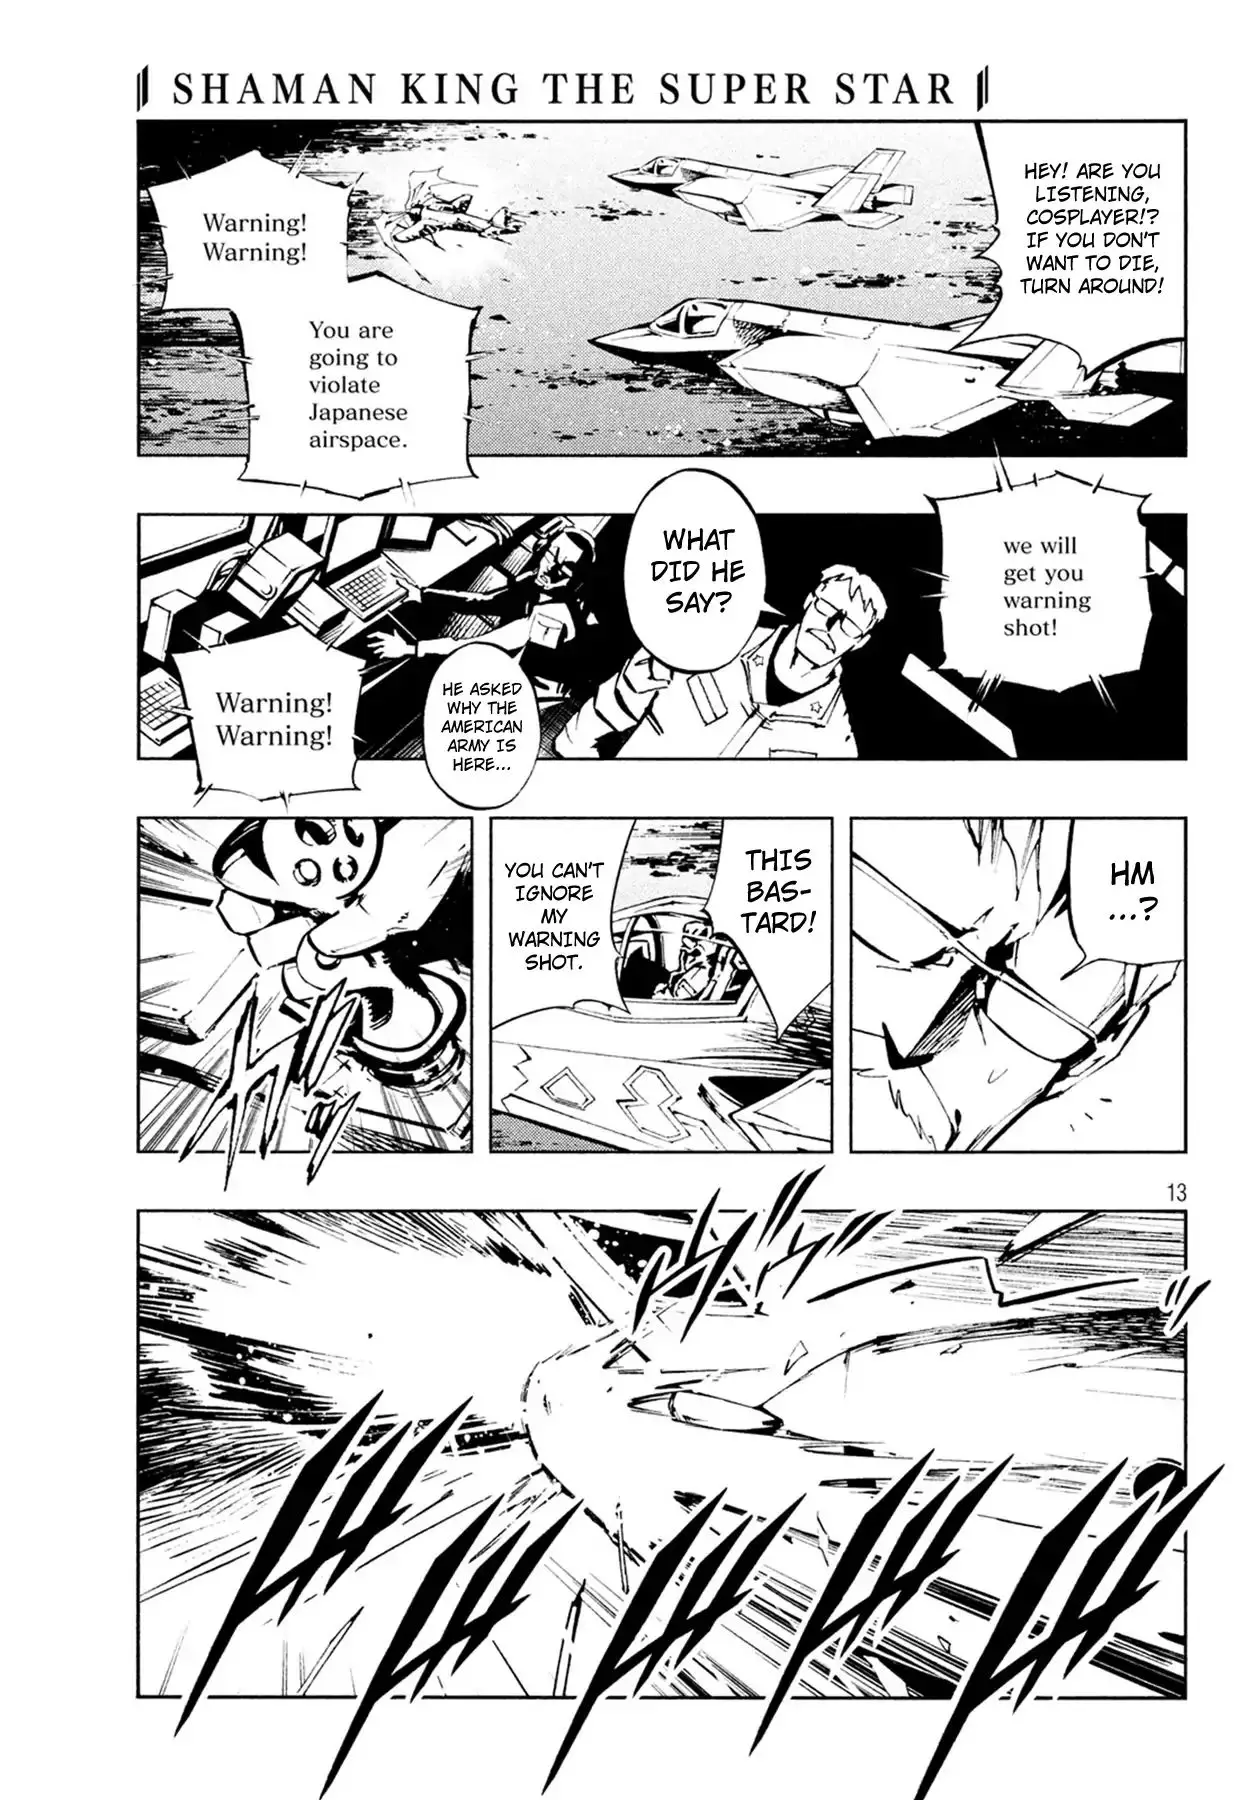 Shaman King: The Super Star - 5 page 13